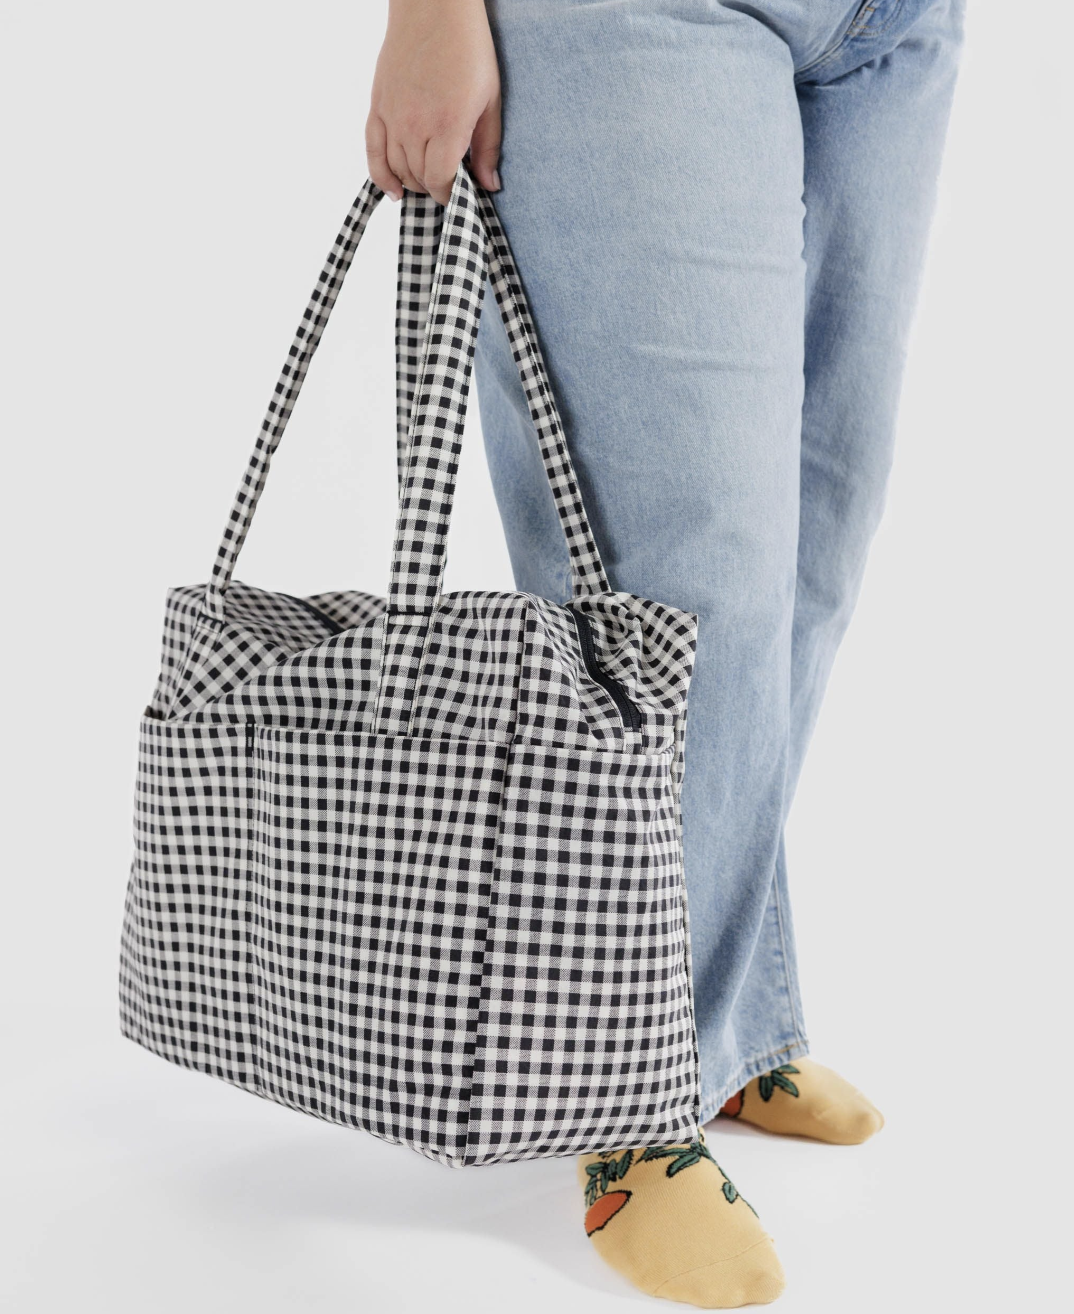 Cloud Carry-On - Black & White Gingham